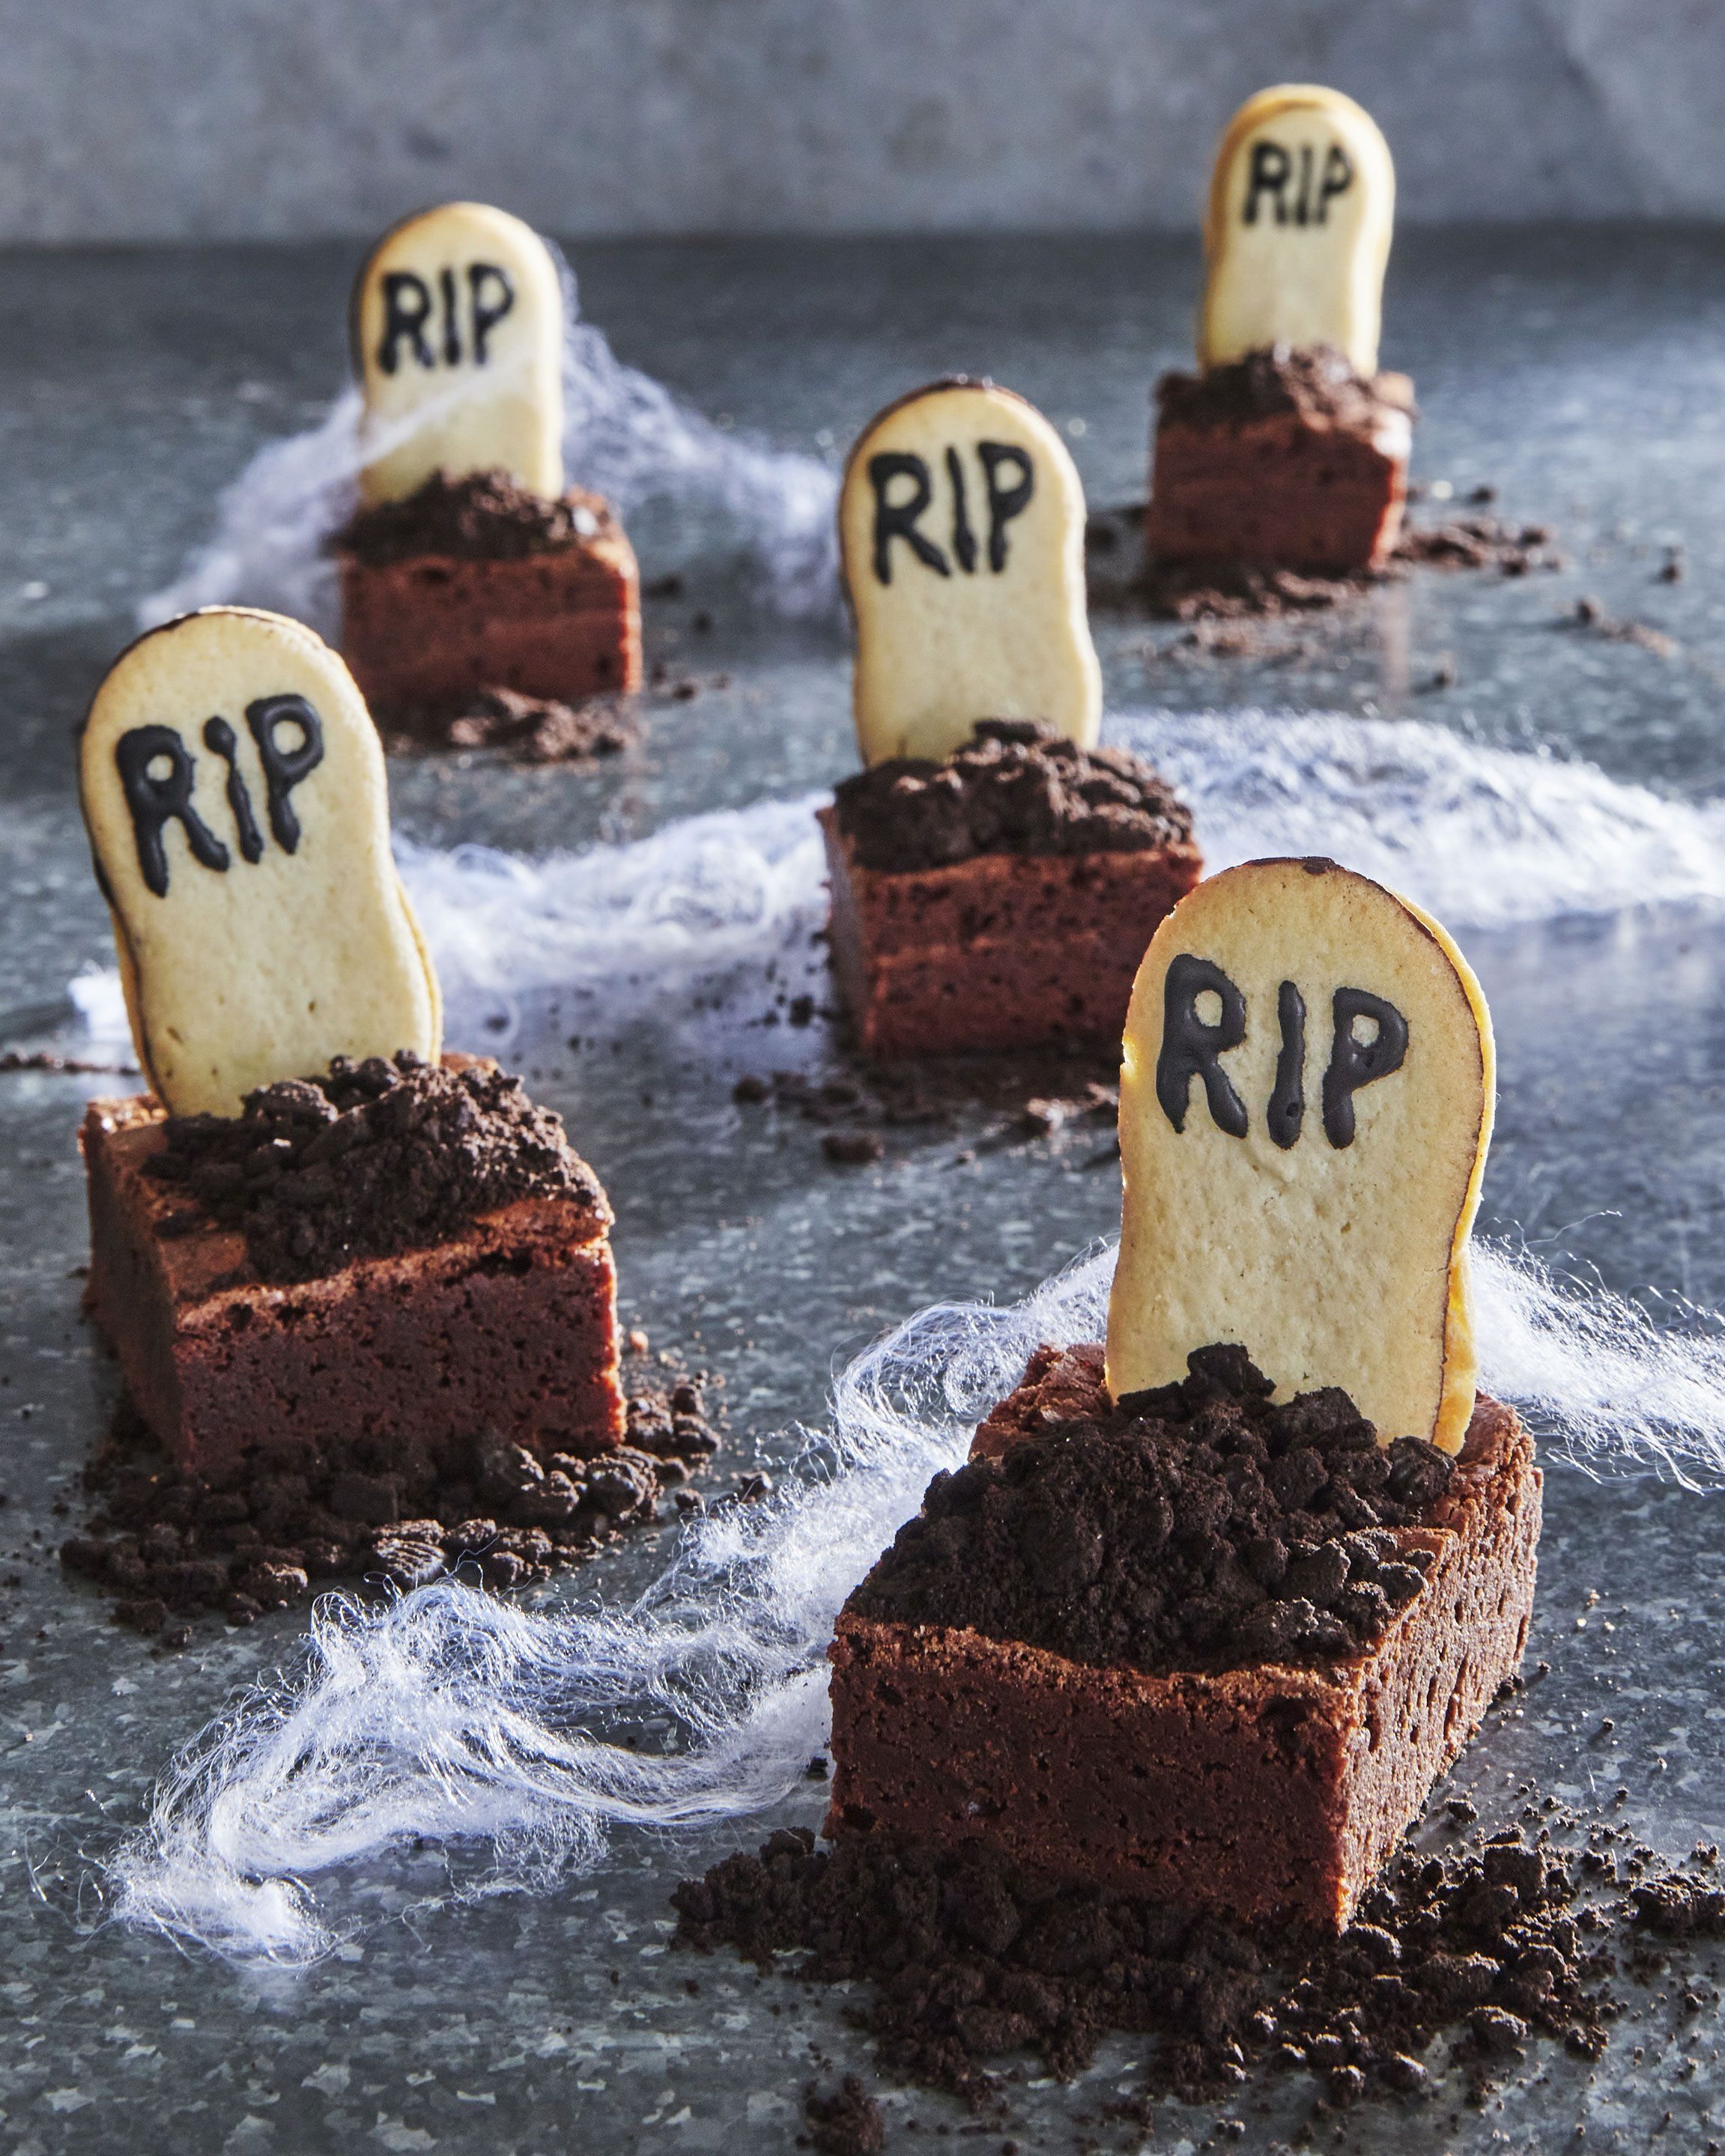 Creepy (yet delicious) coffin cakes: chocolate cake, peanut butter